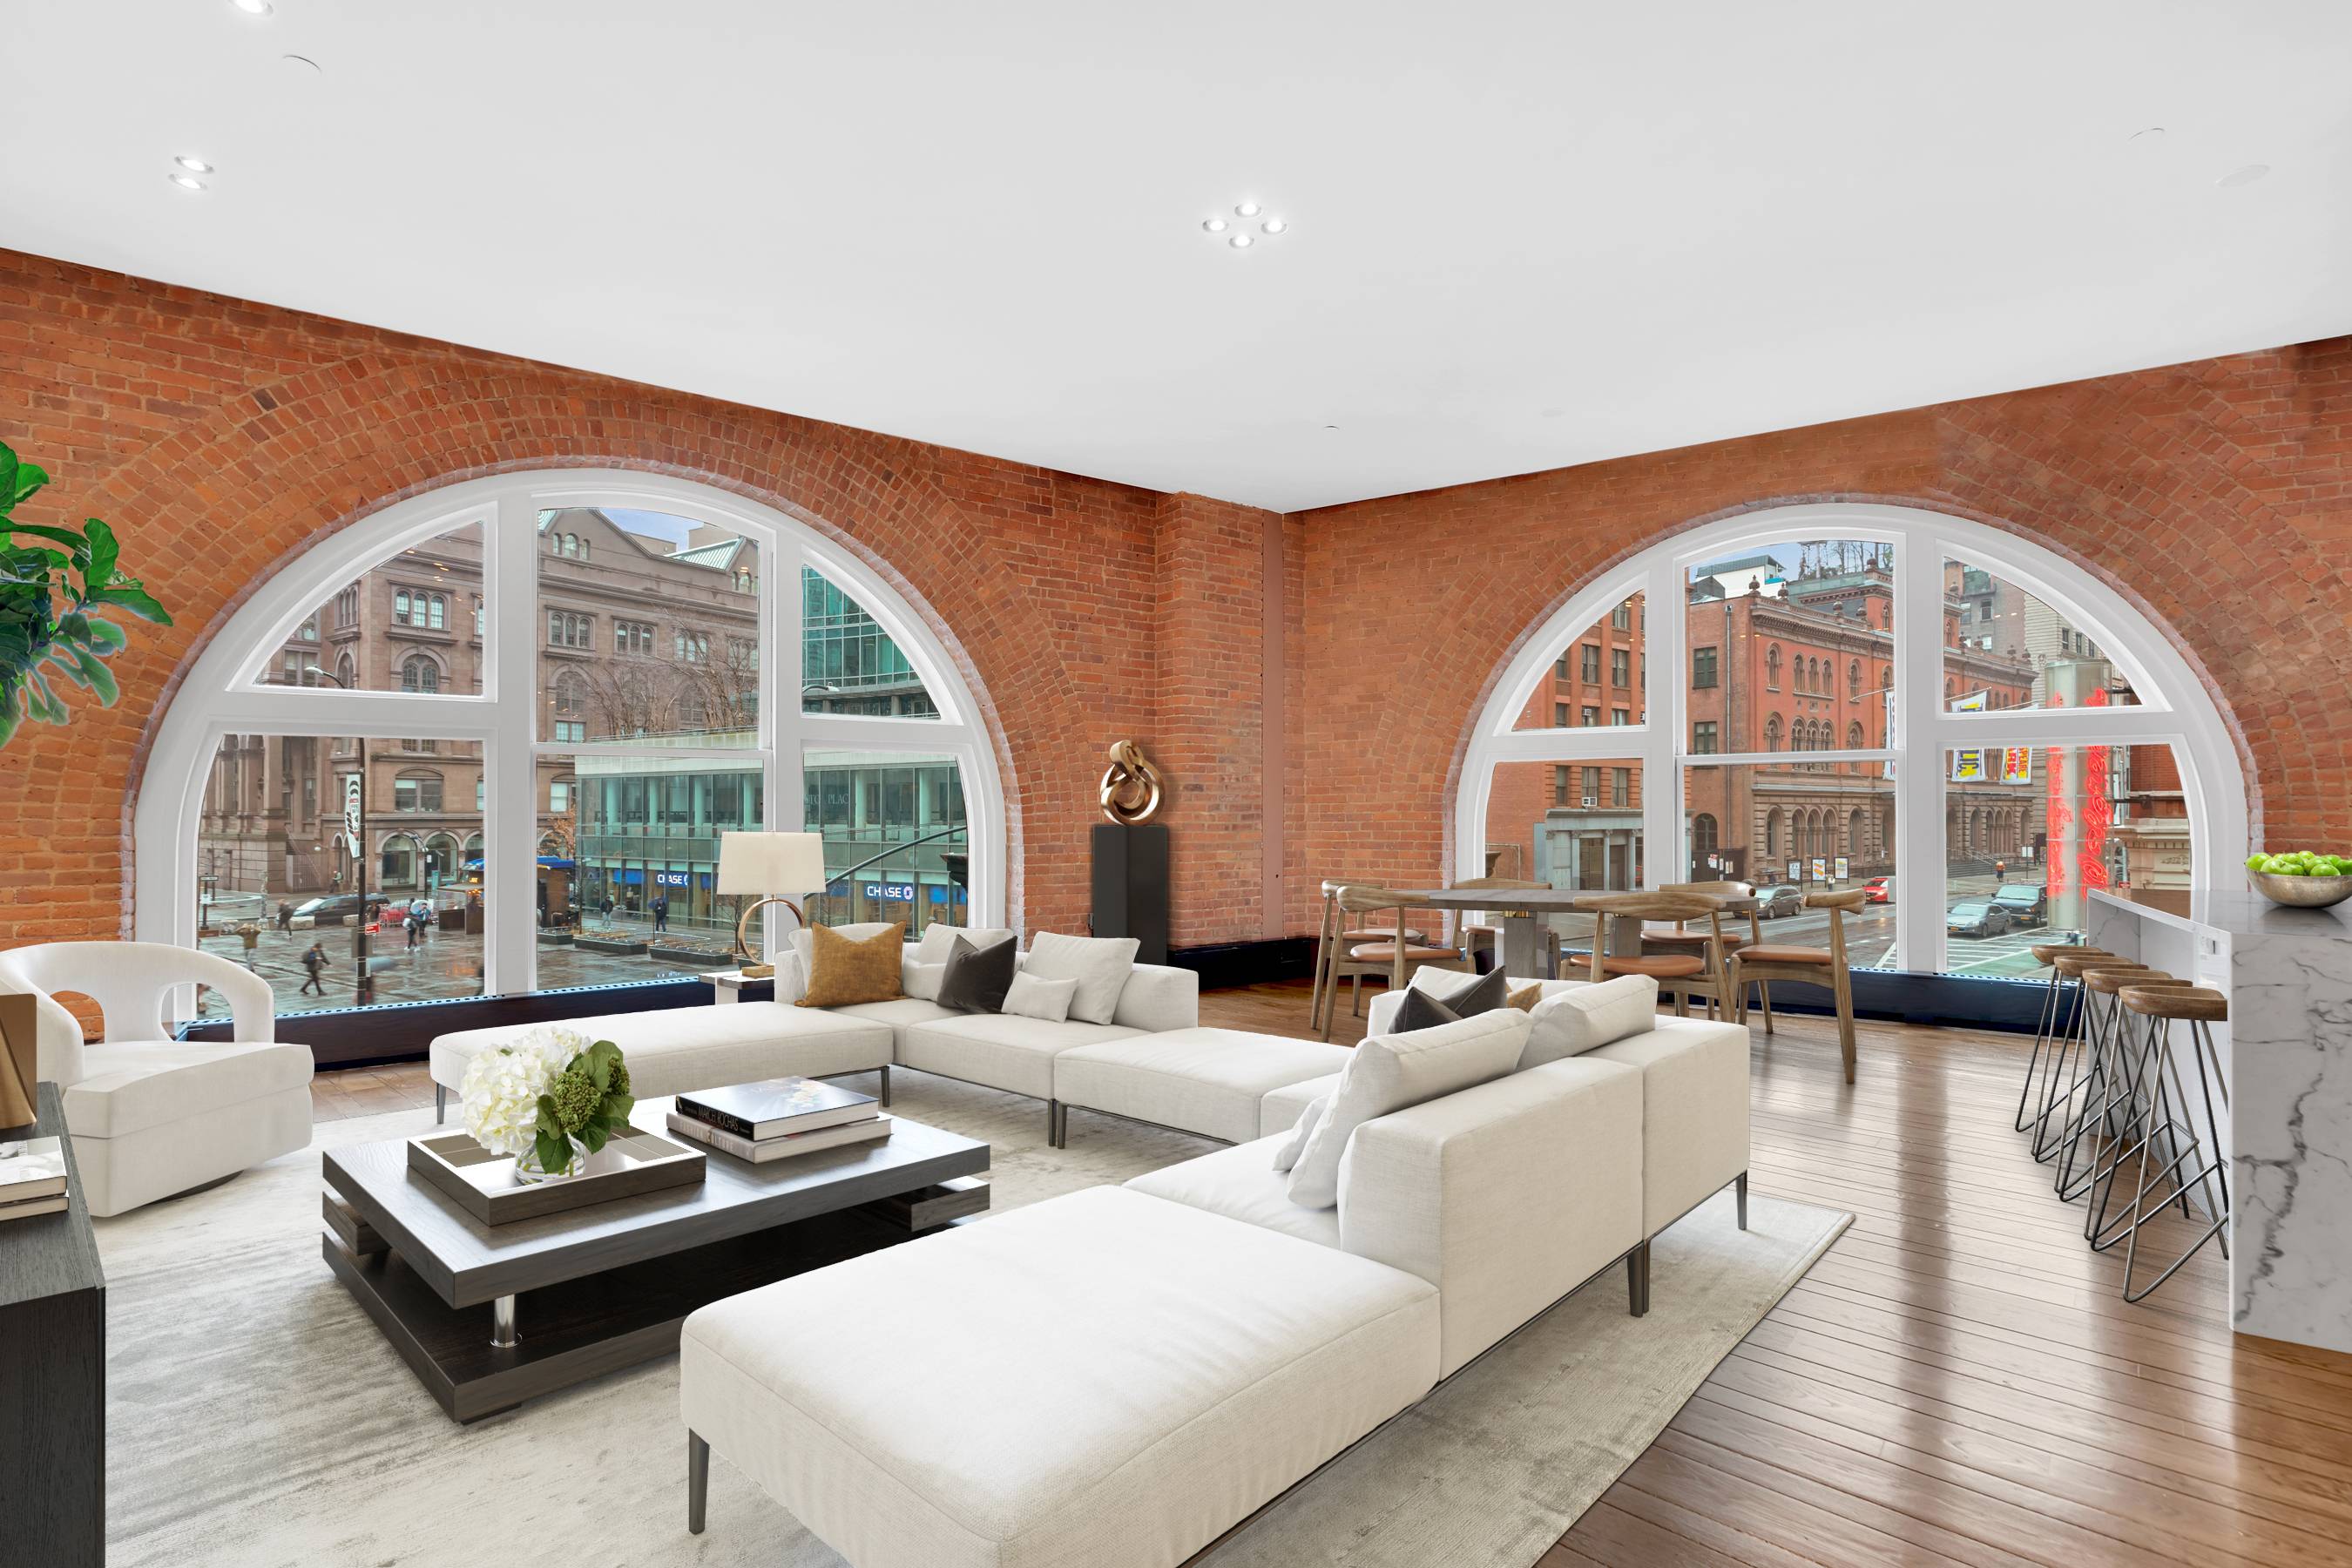 Residence 2E is a gracious contemporary loft style two bedroom, two and a half bathroom home at 21 Astor Place.